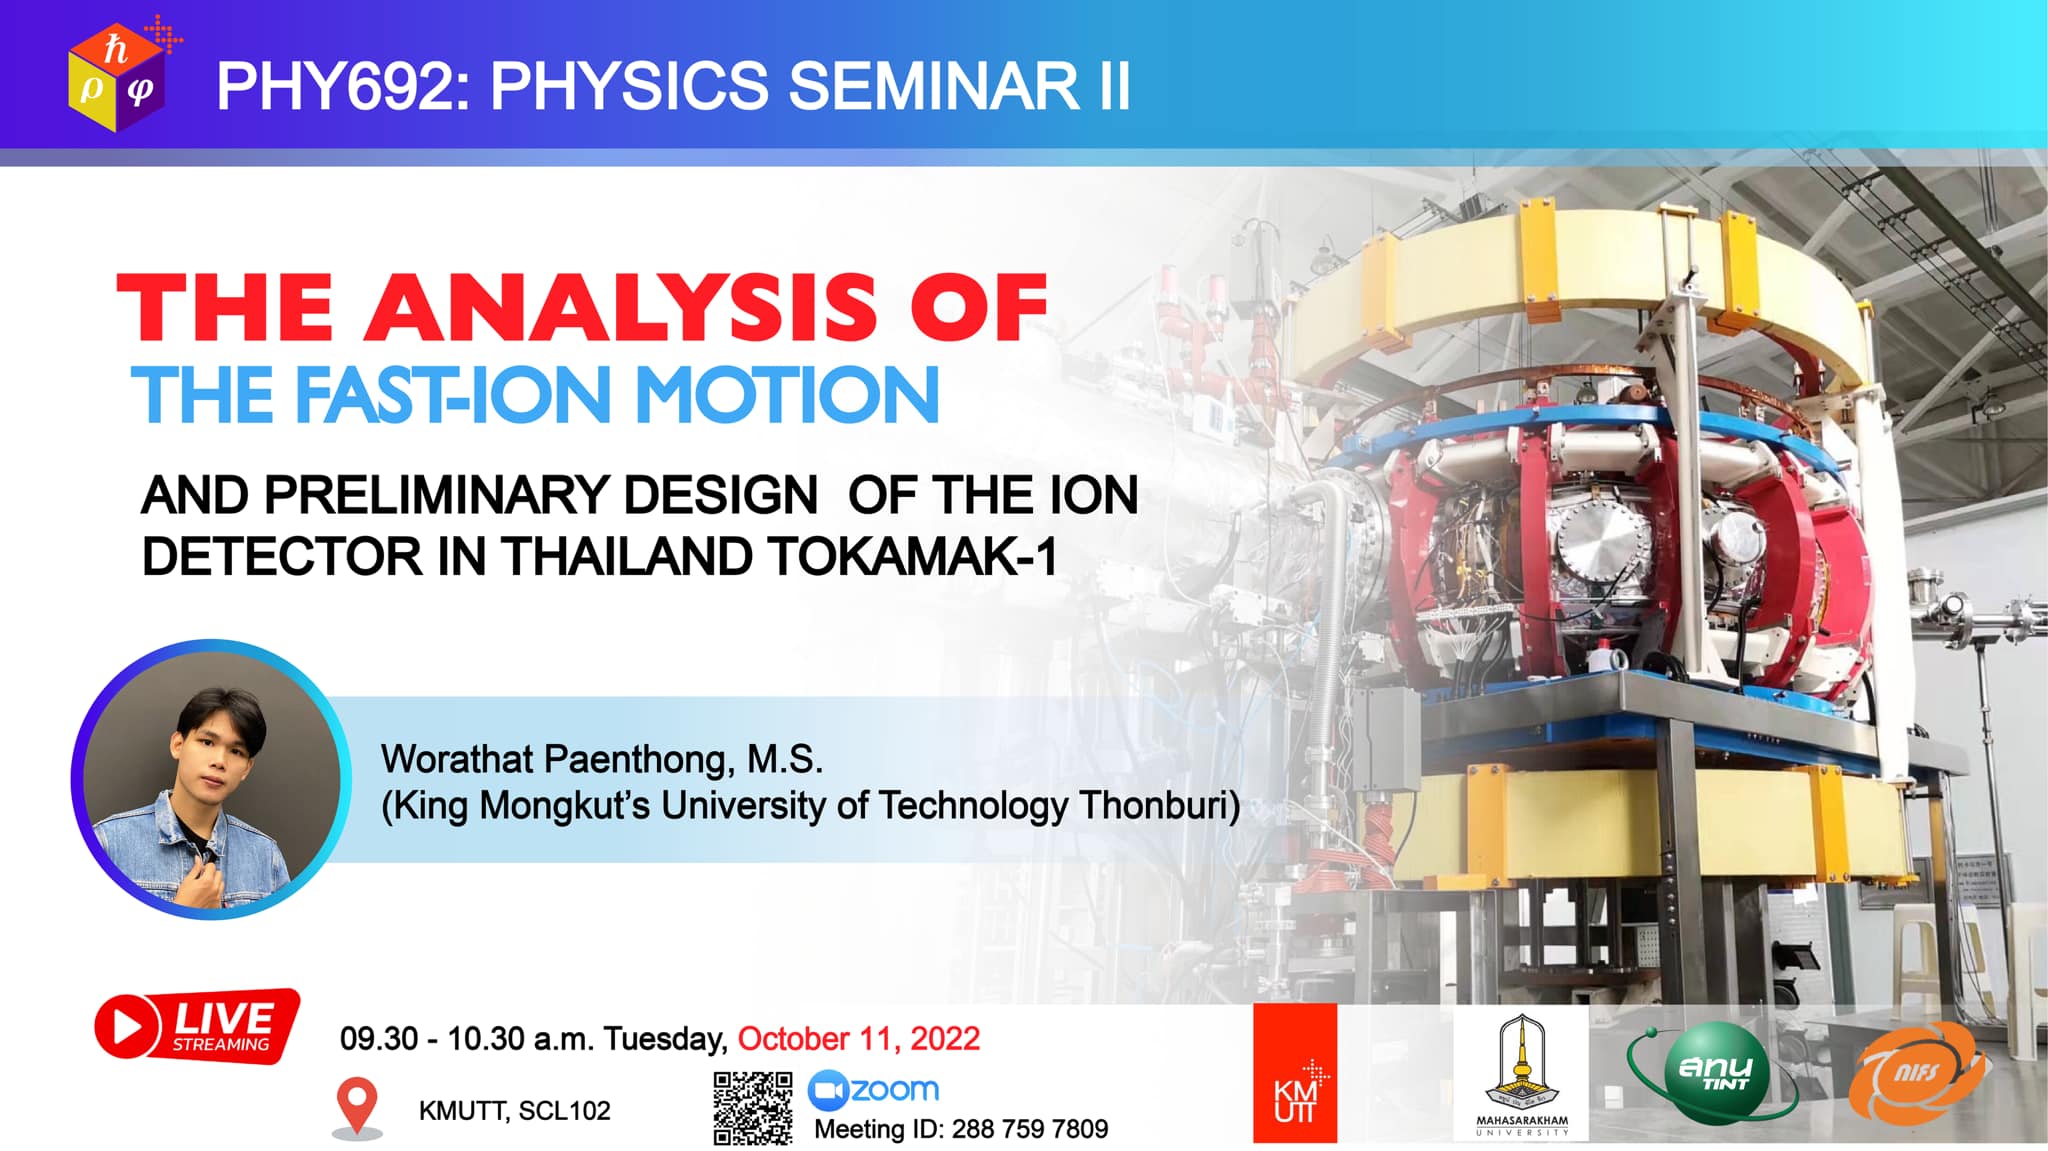 "The analysis of the fast-ion motion and preliminary design of the ion detector in Thailand Tokamak-1" on Tuesday 11 October, 2022, 09:30 - 10:30 AM